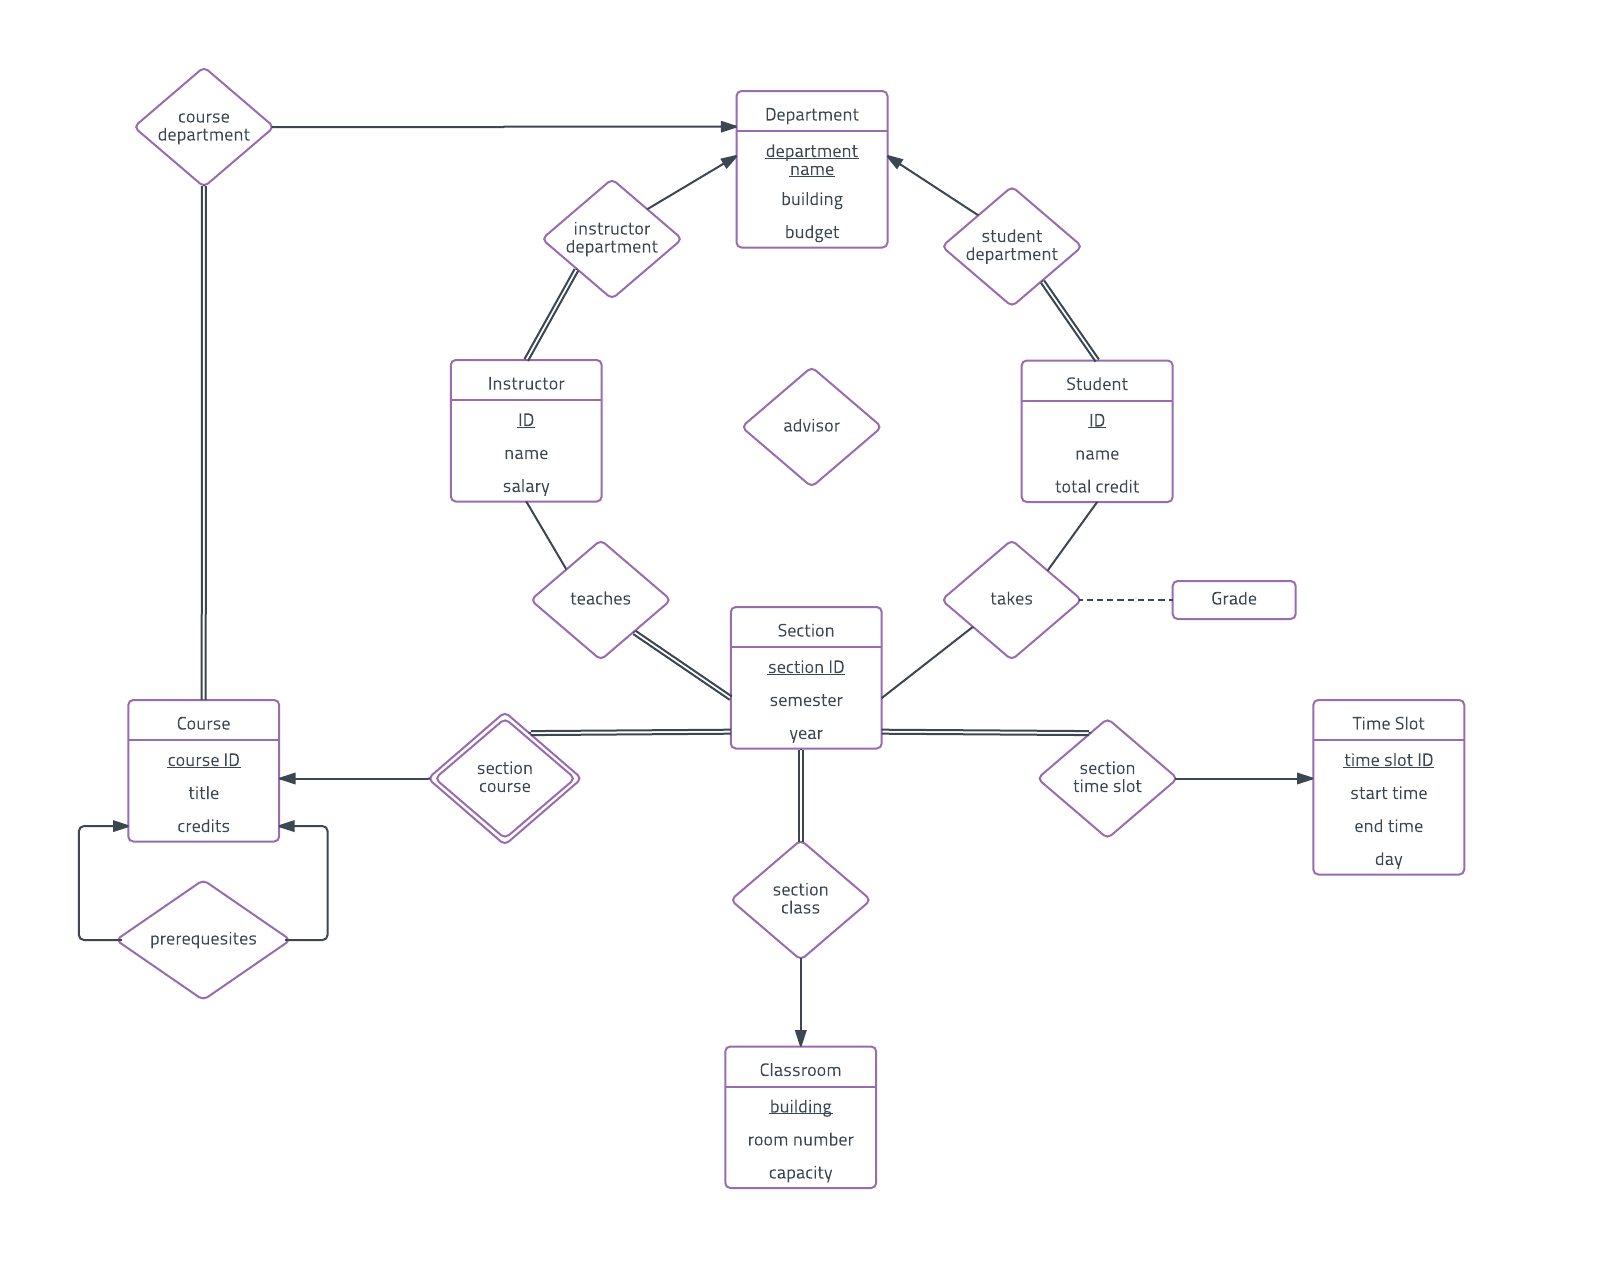 Er Diagram Examples And Templates | Lucidchart with regard to Er Diagram Examples With Scenario